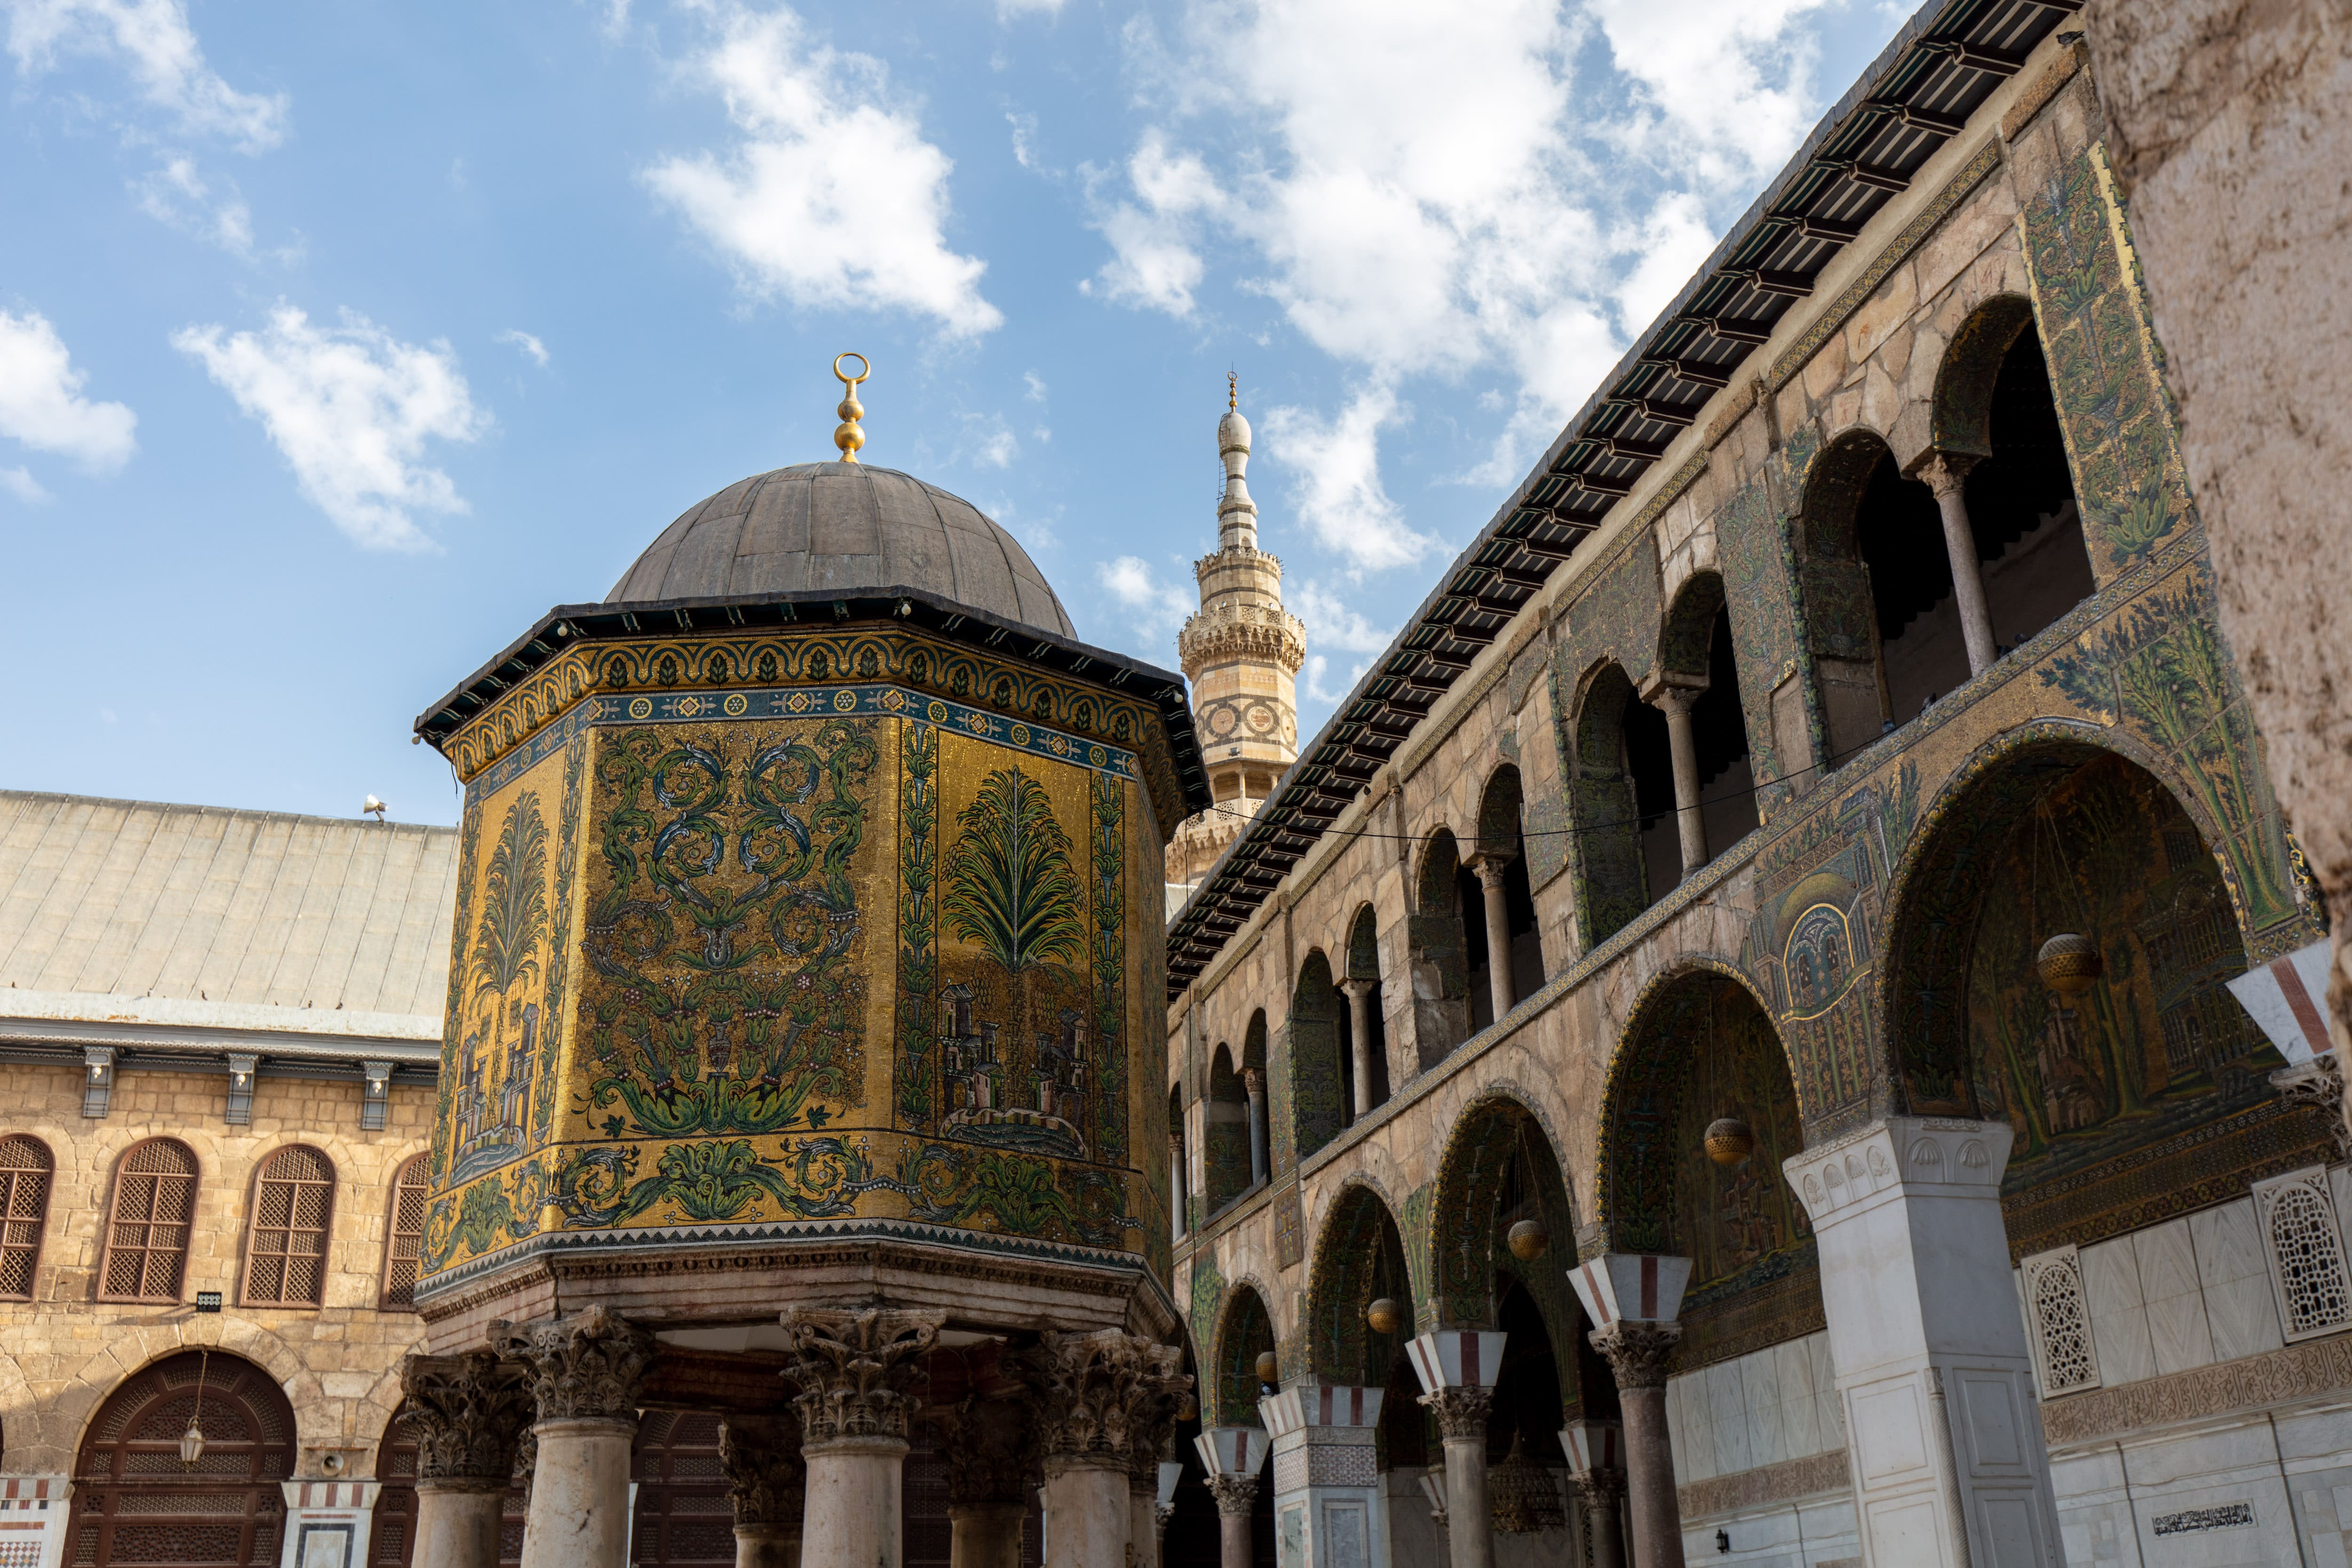 Tracing The History Behind The Great Umayyad Mosque Of Damascus